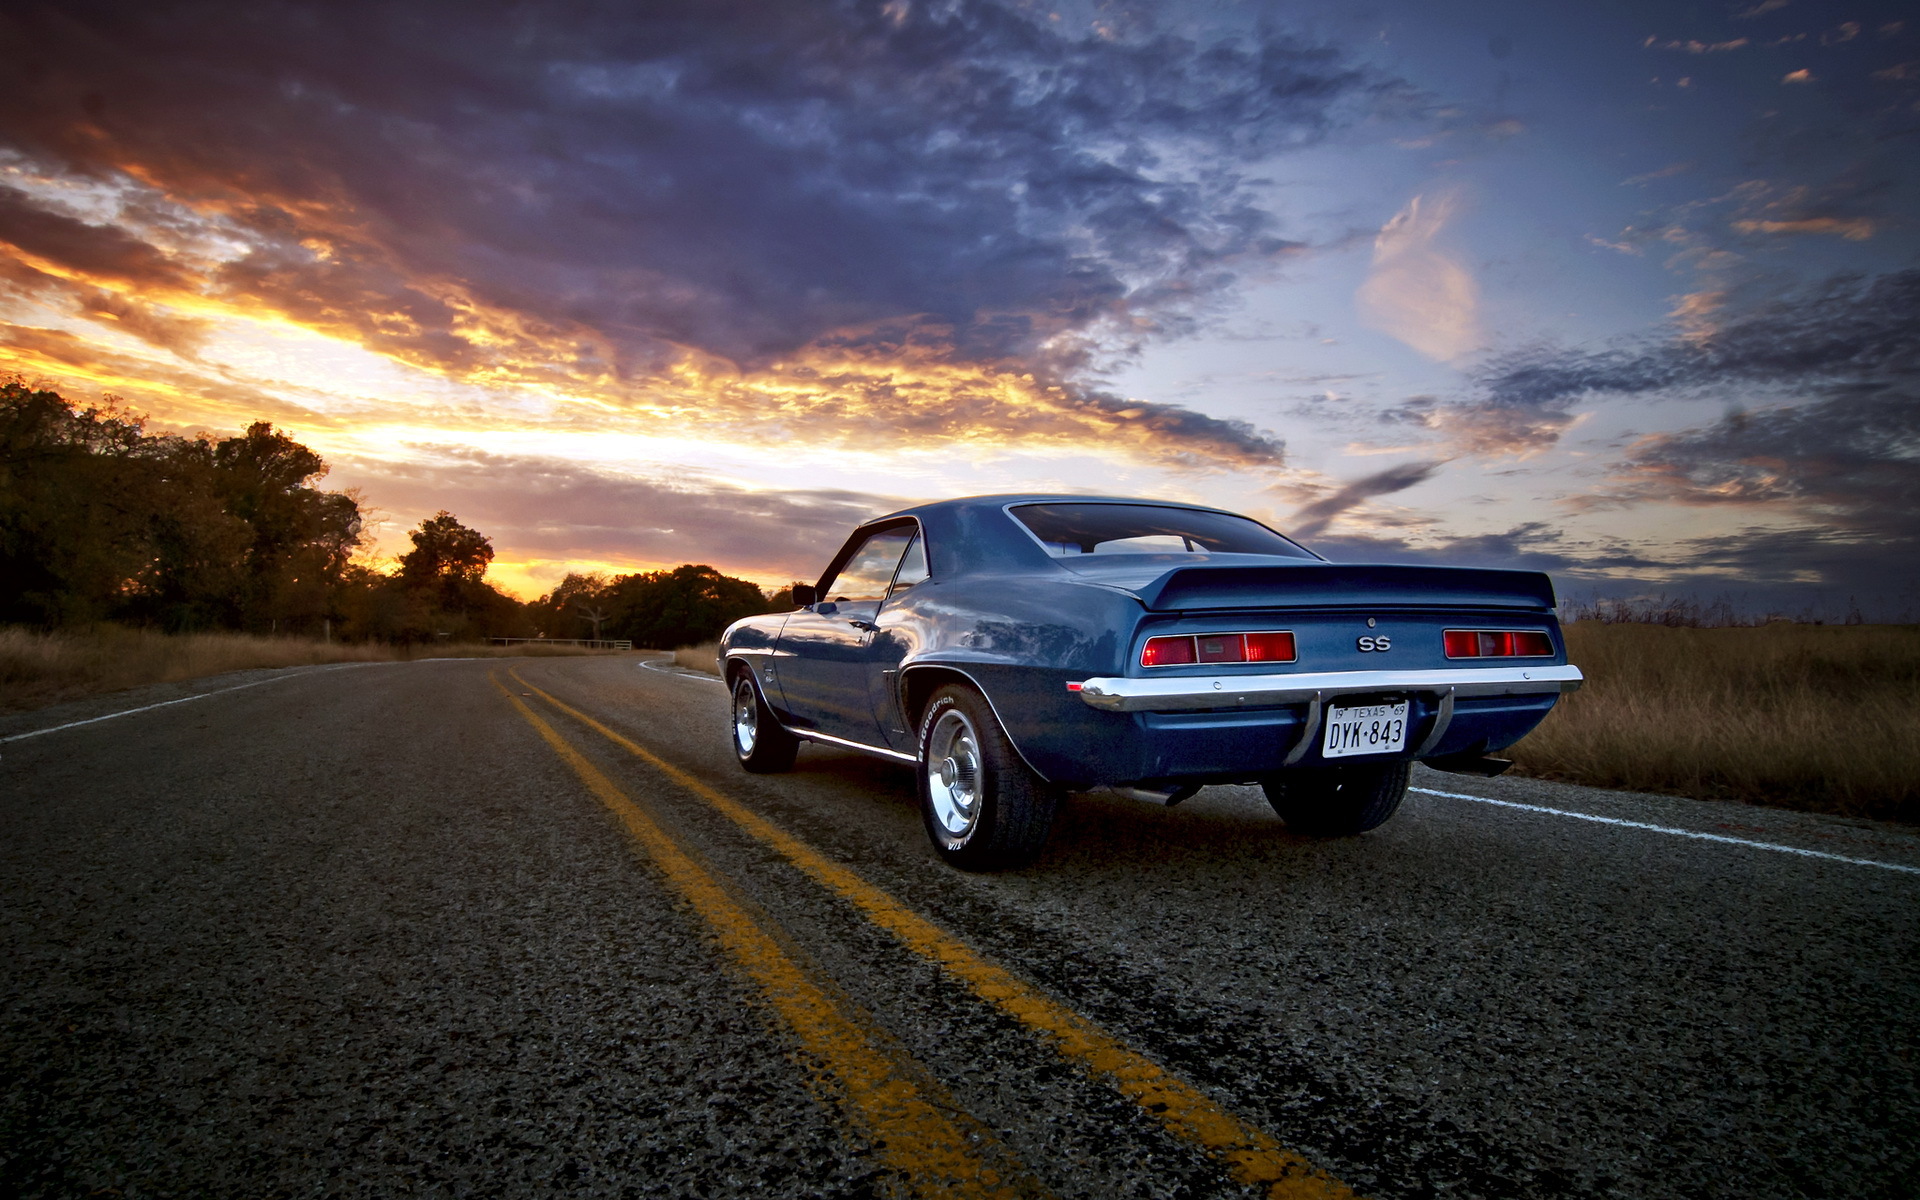 1969, Chevy, Camaro, Ss, Vehicles, Auto, Chevrolet, Retro, Classic, Muscle, Wheels, Roads, Sunset, Sunrise, Sky, Clouds, Trees, Chrome, Stripes Wallpaper